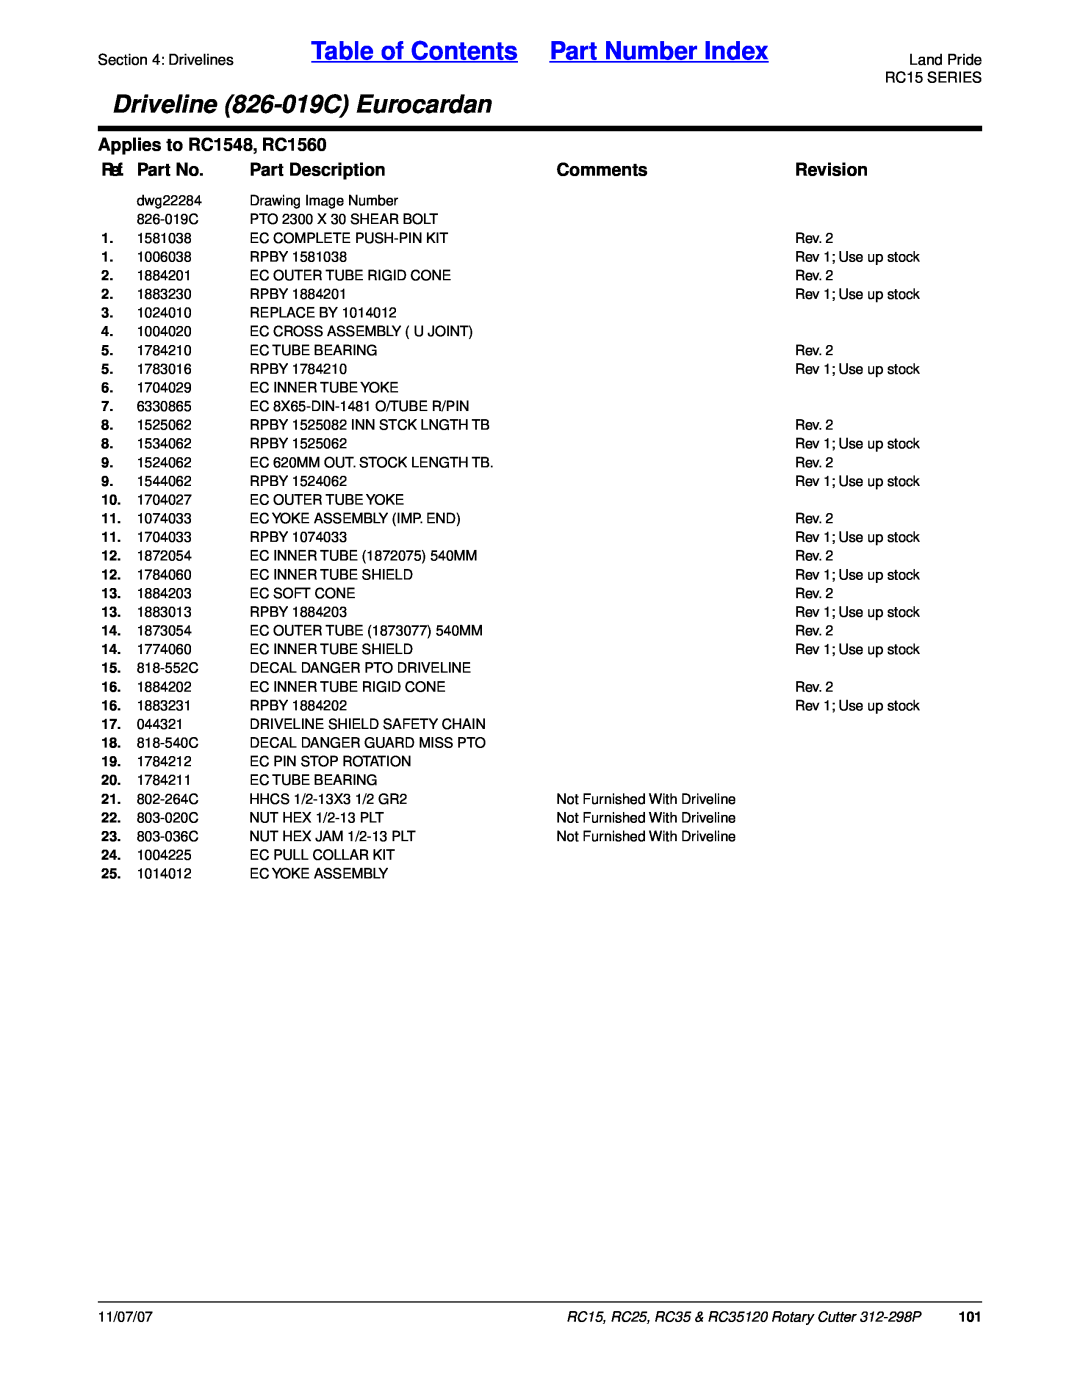 Land Pride RC35 Table of Contents Part Number Index, Driveline 826-019CEurocardan, Applies to RC1548, RC1560, Ref. Part No 